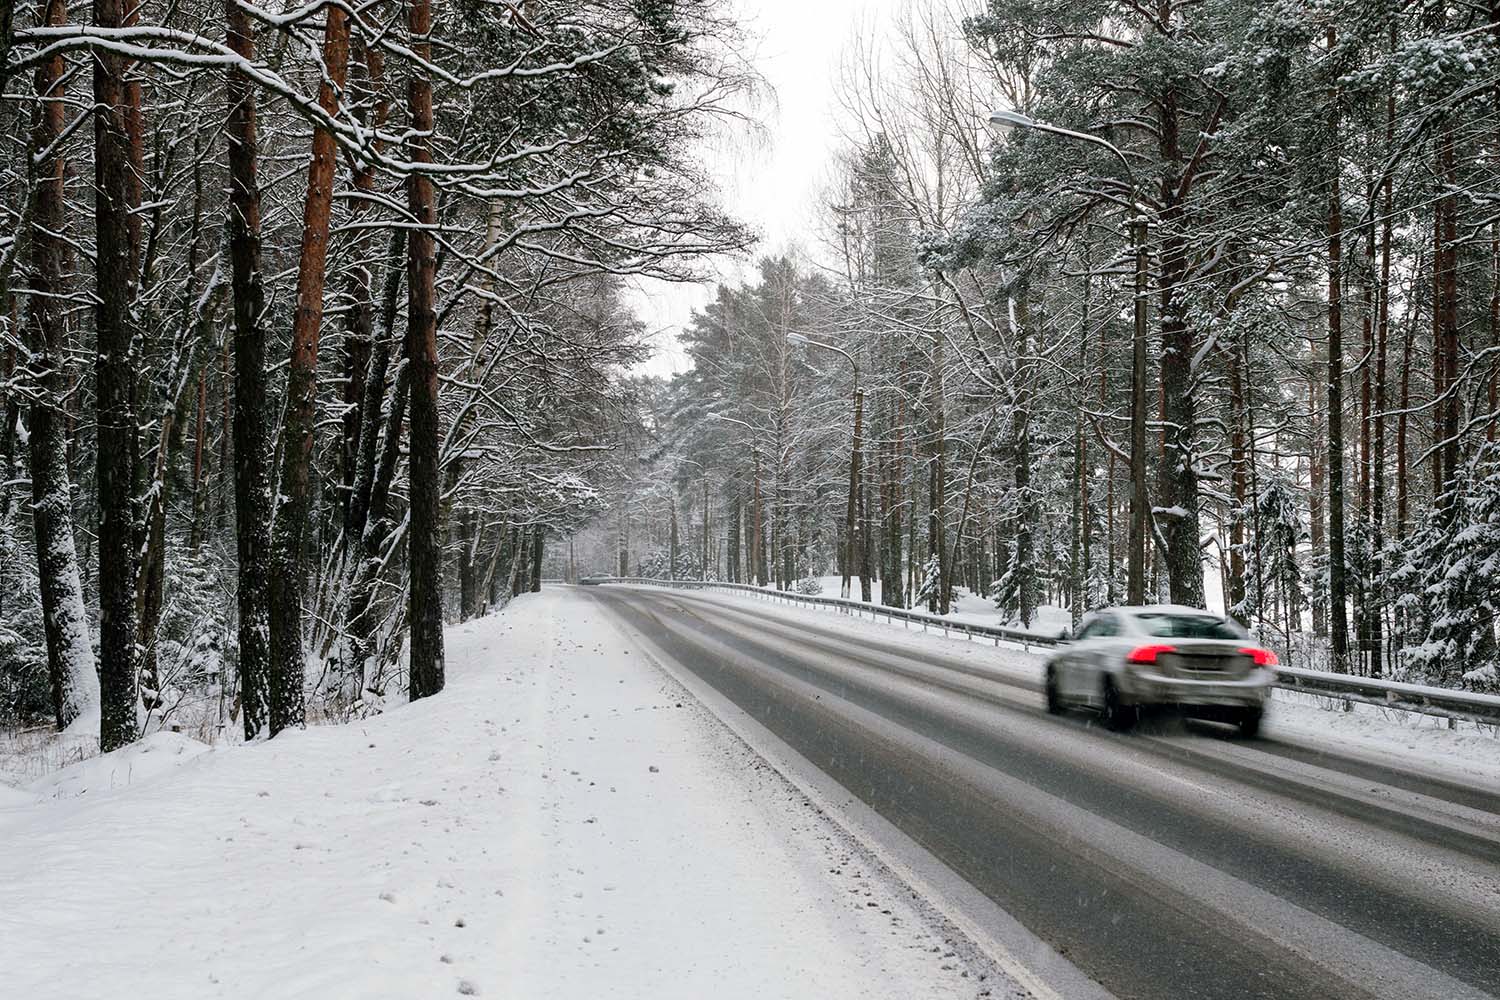 Car drives on a snowy road lined with trees.